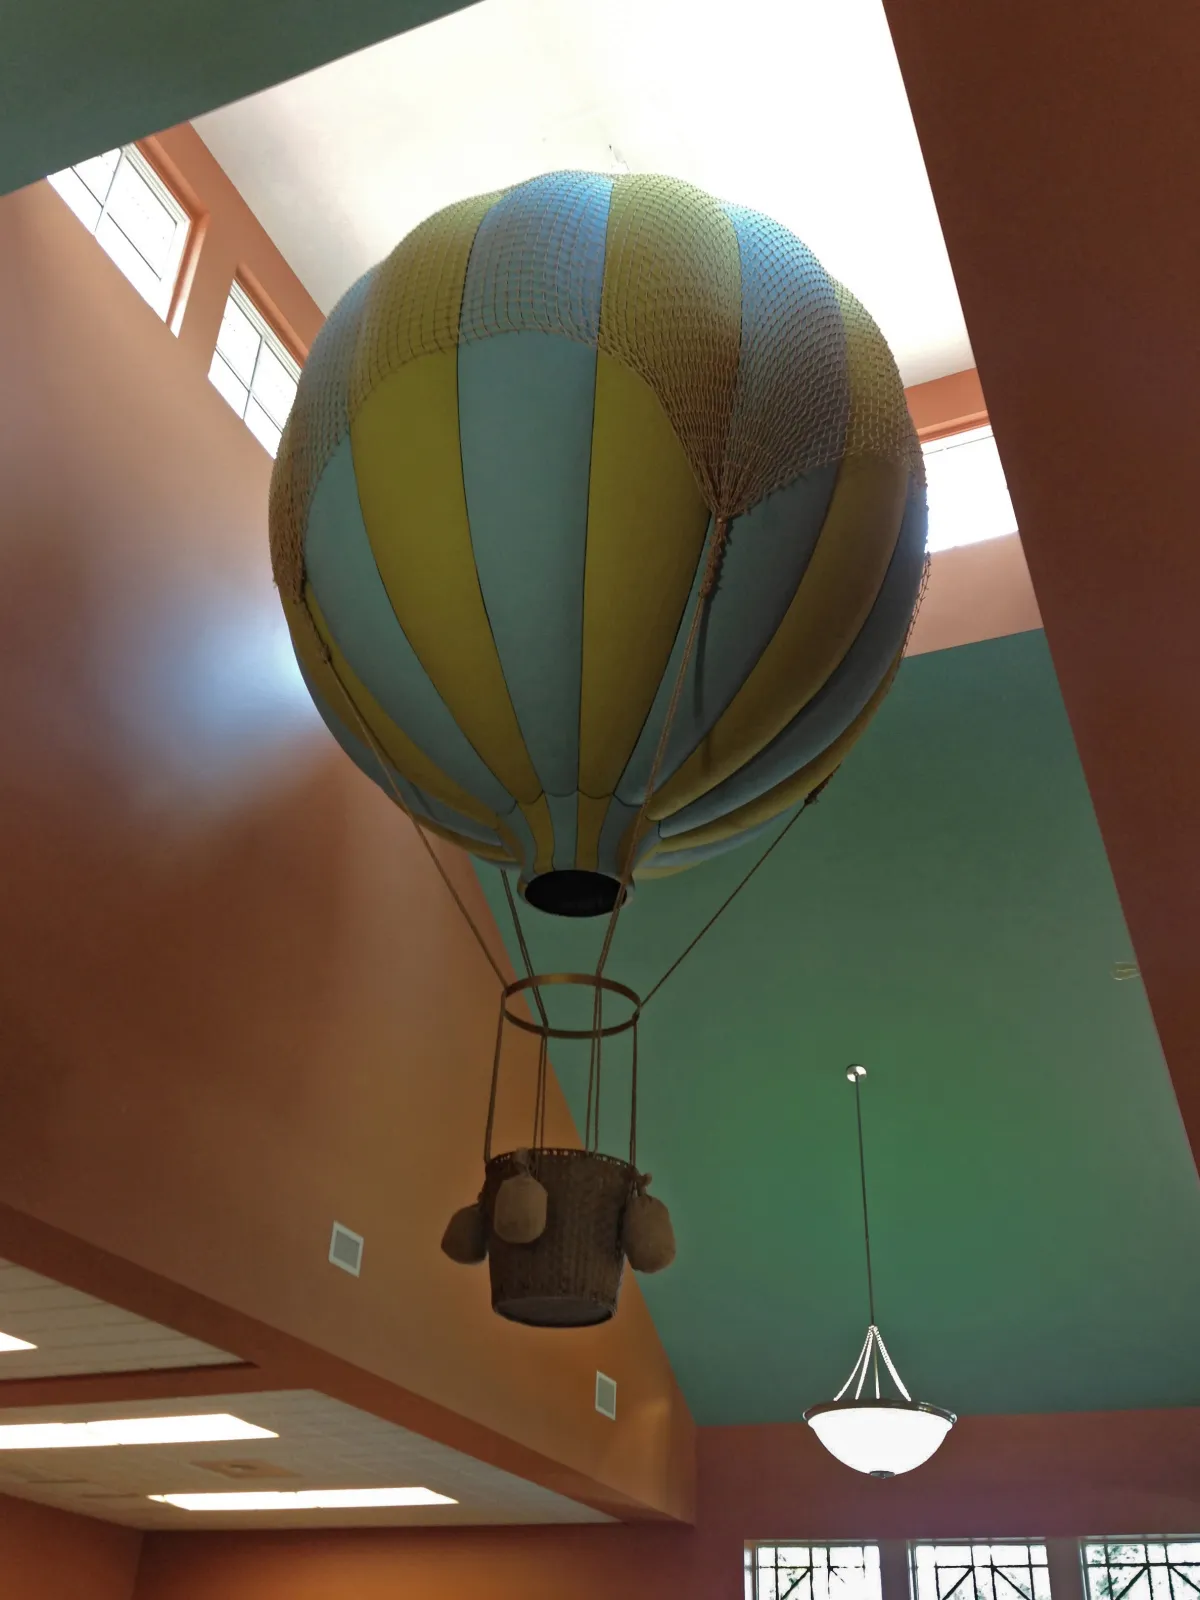 Hot air balloon sculpture floating in tall ceiling